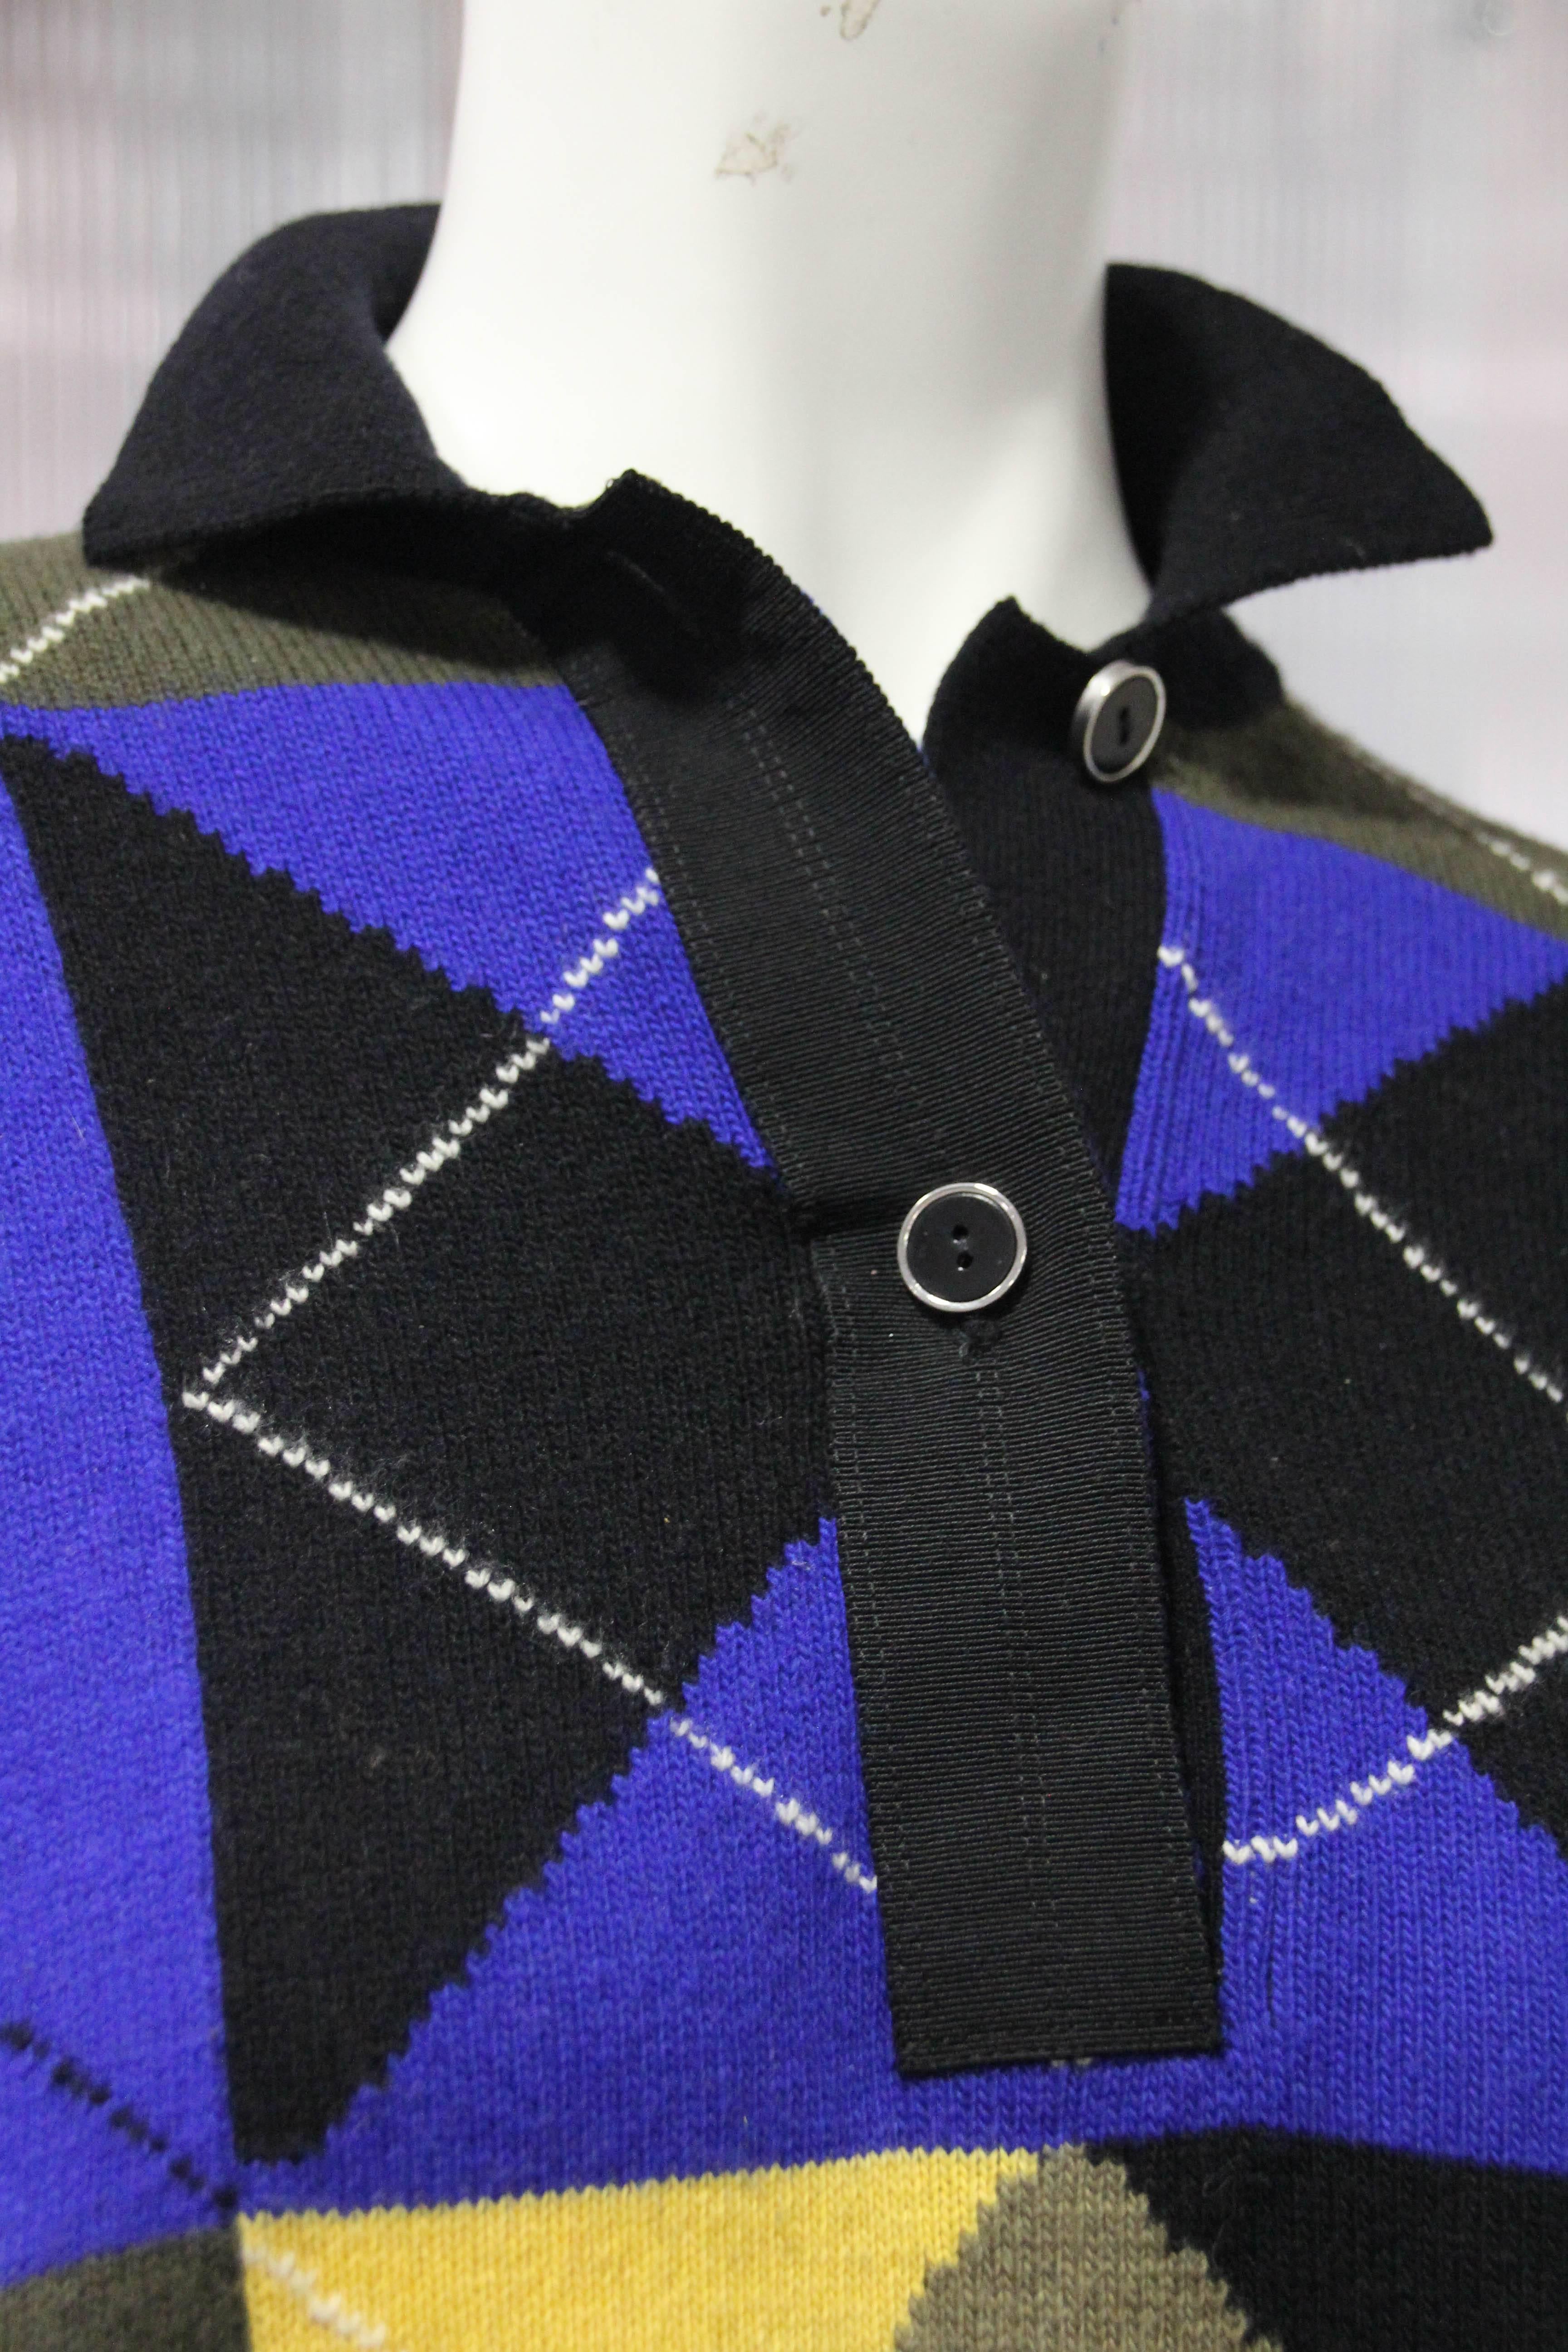 1980s Gianni Versace cropped wool argyle polo sweater in blue, yellow, white and black. Front button placket collar. Drop-shoulder. Oversized fit.